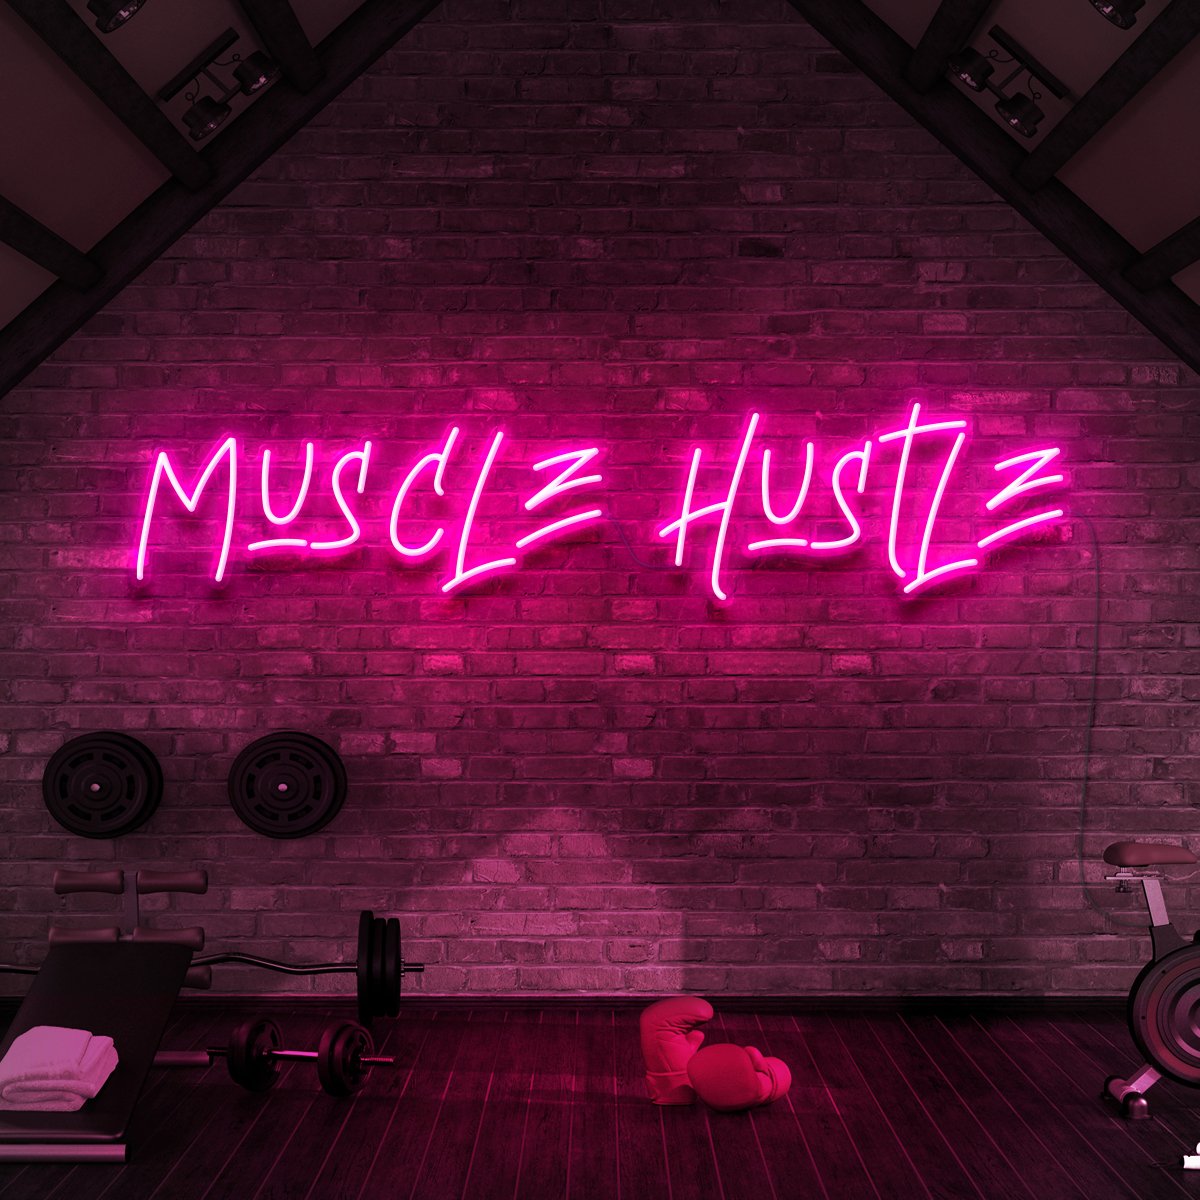 "Muscle Hustle" Neon Sign for Gyms & Fitness Studios 60cm (2ft) / Pink / LED Neon by Neon Icons